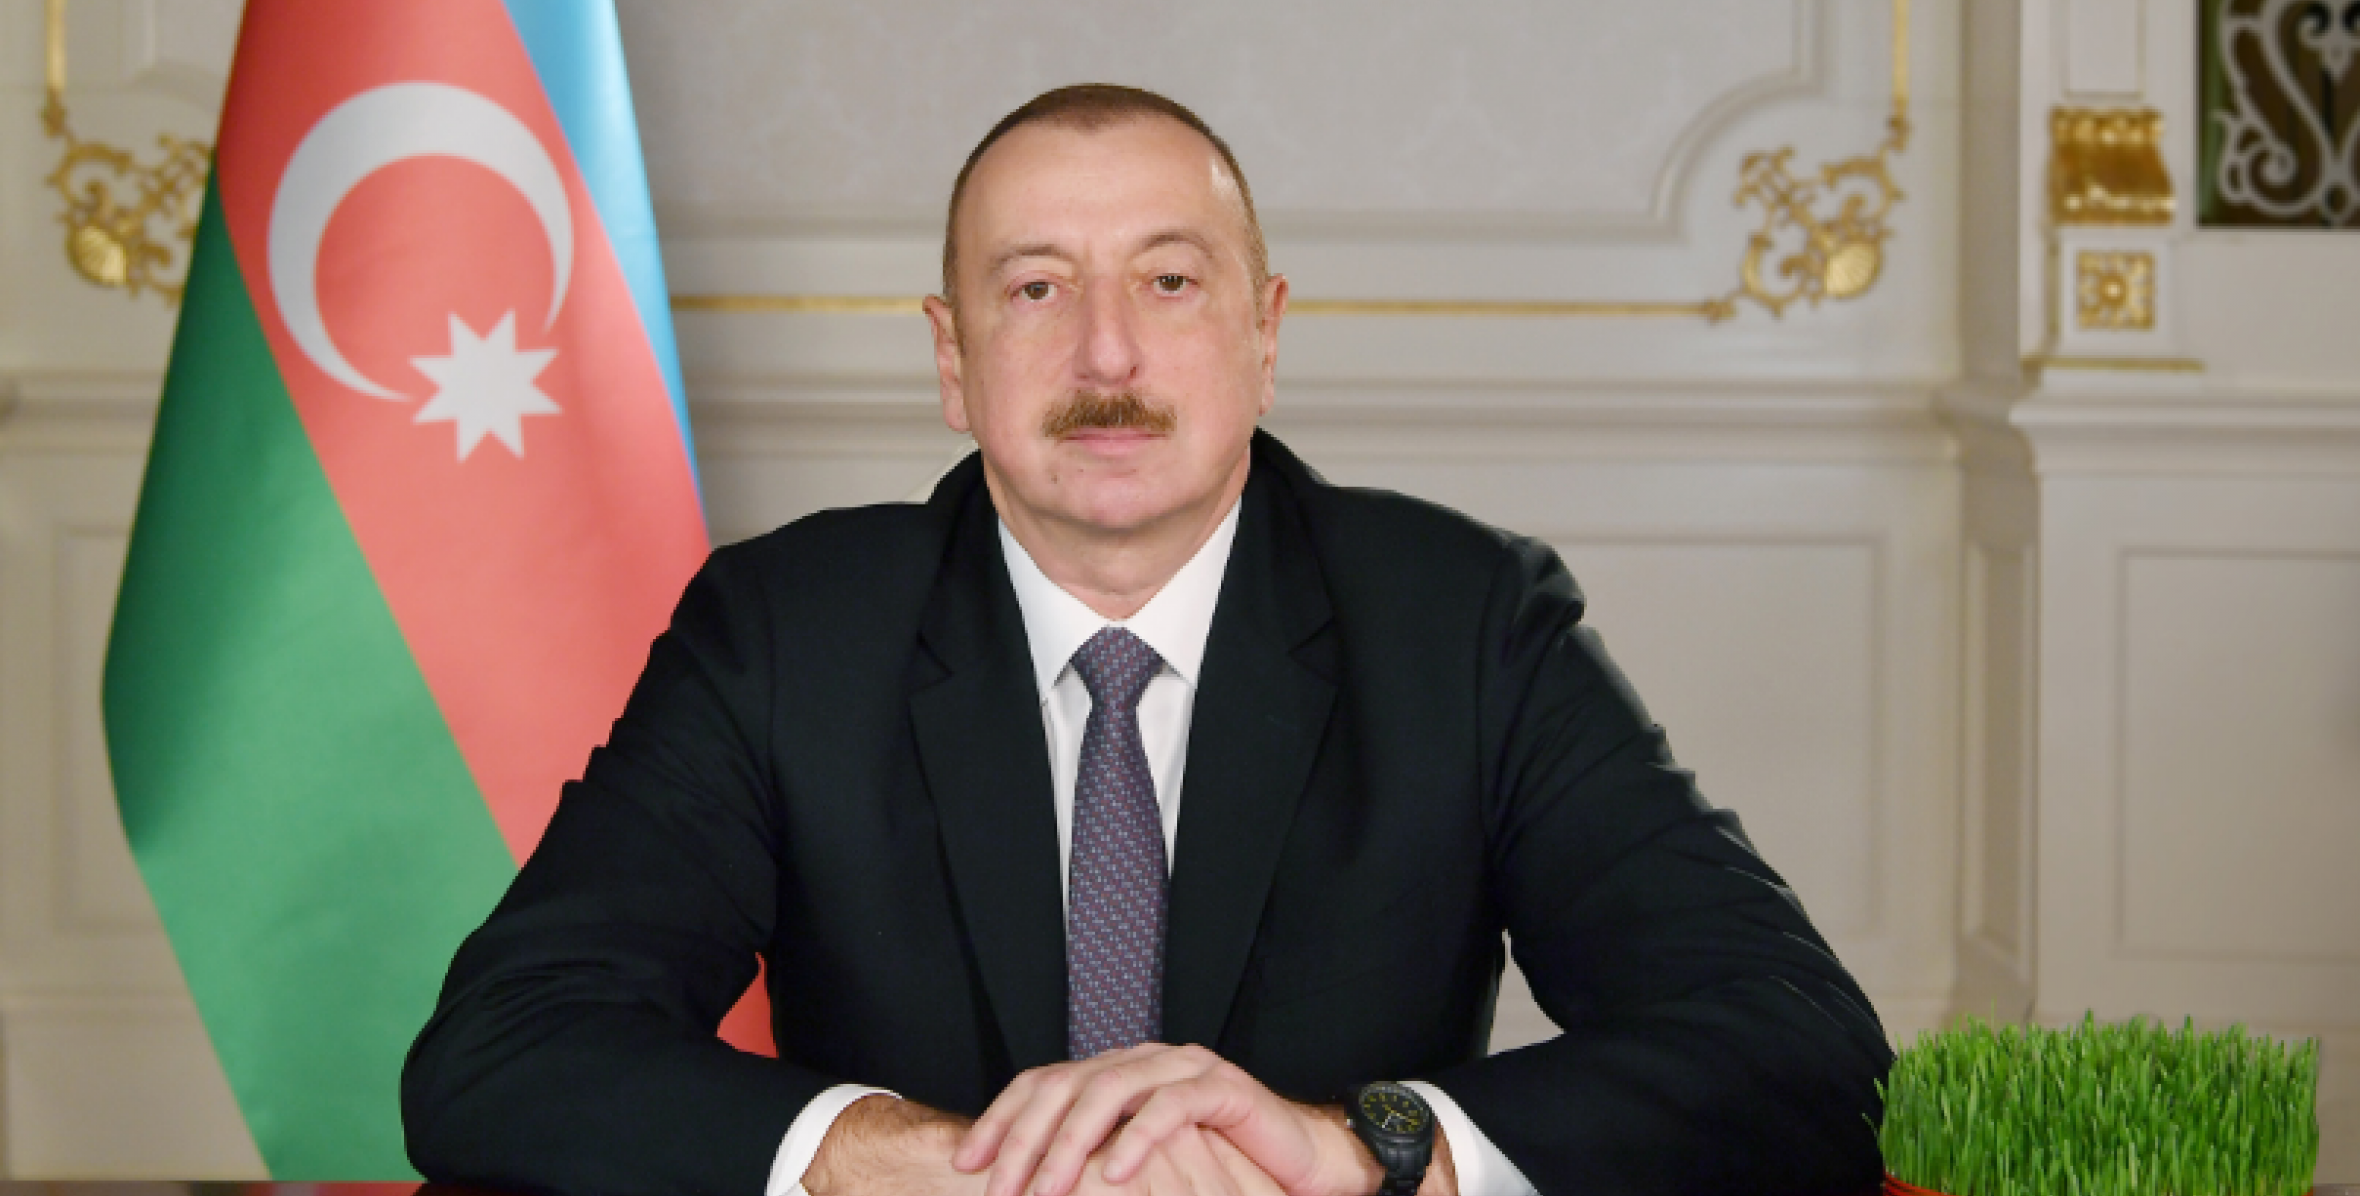 Message of congratulation from President Ilham Aliyev to the people of Azerbaijan on the occasion of Novruz